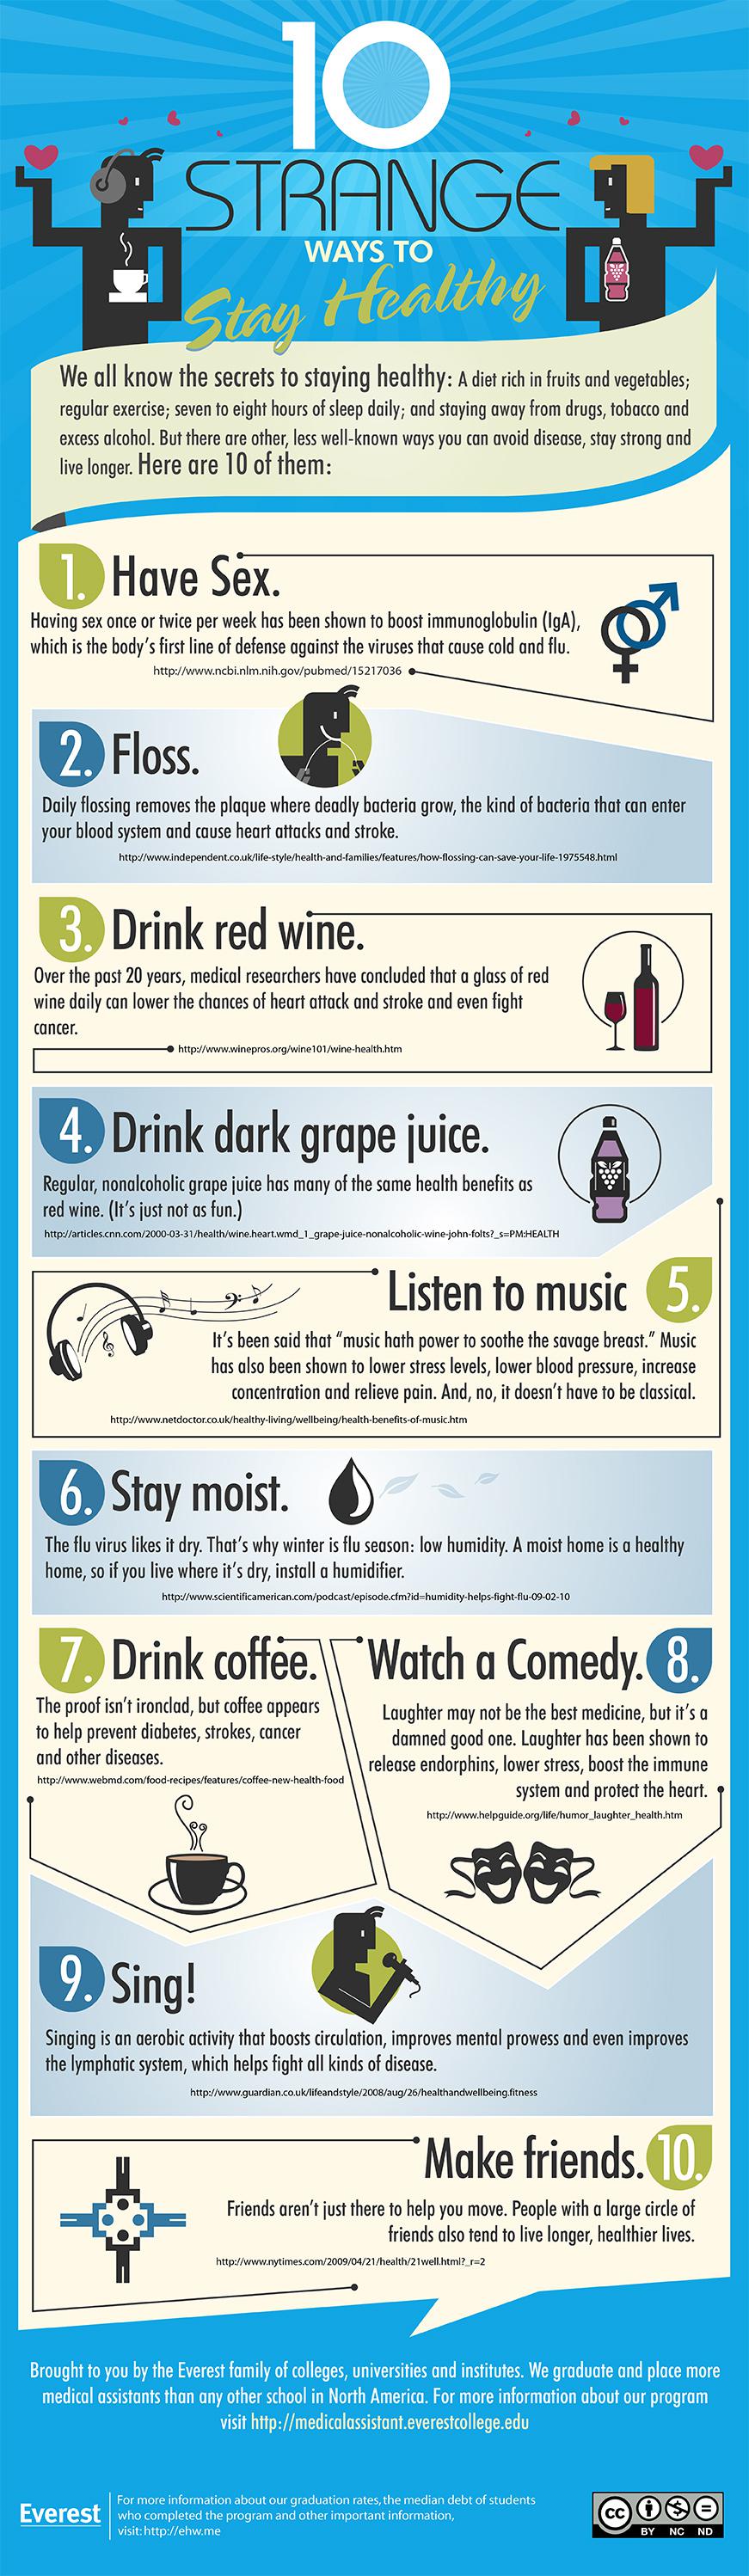 Fun Ways to Stay Healthy